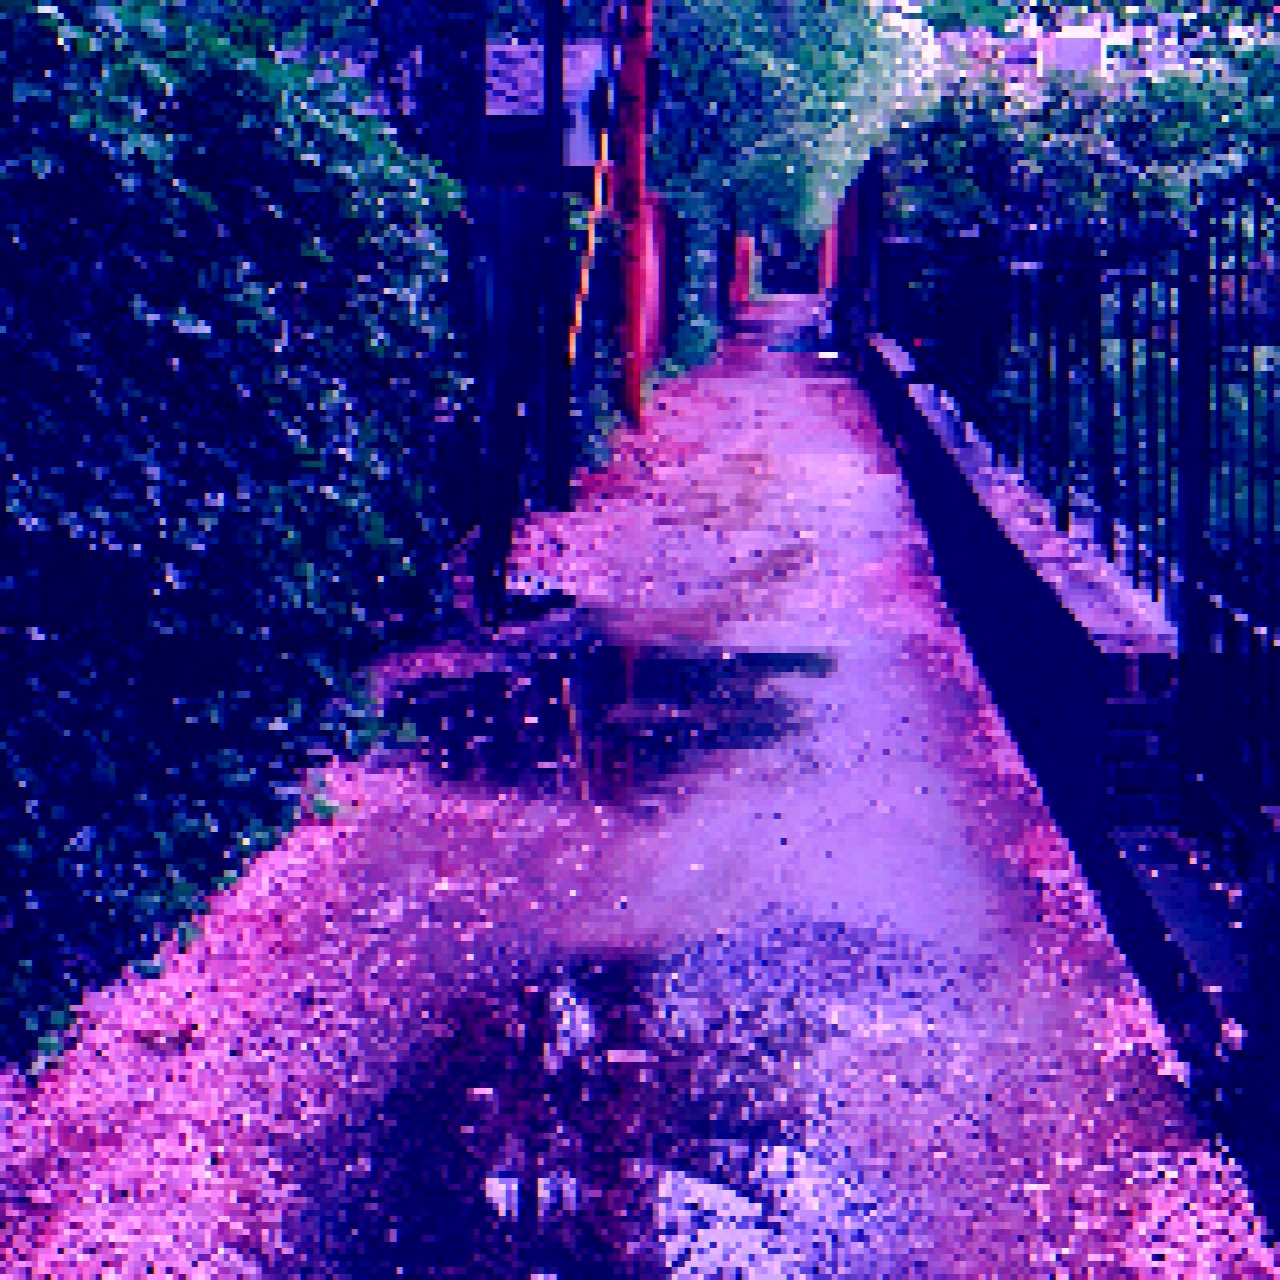 A path showing a gate, lots of overgrown greenery and pink petals strewn about on the sidewalk. It appears as if it has just rained, as there are a few puddles around.